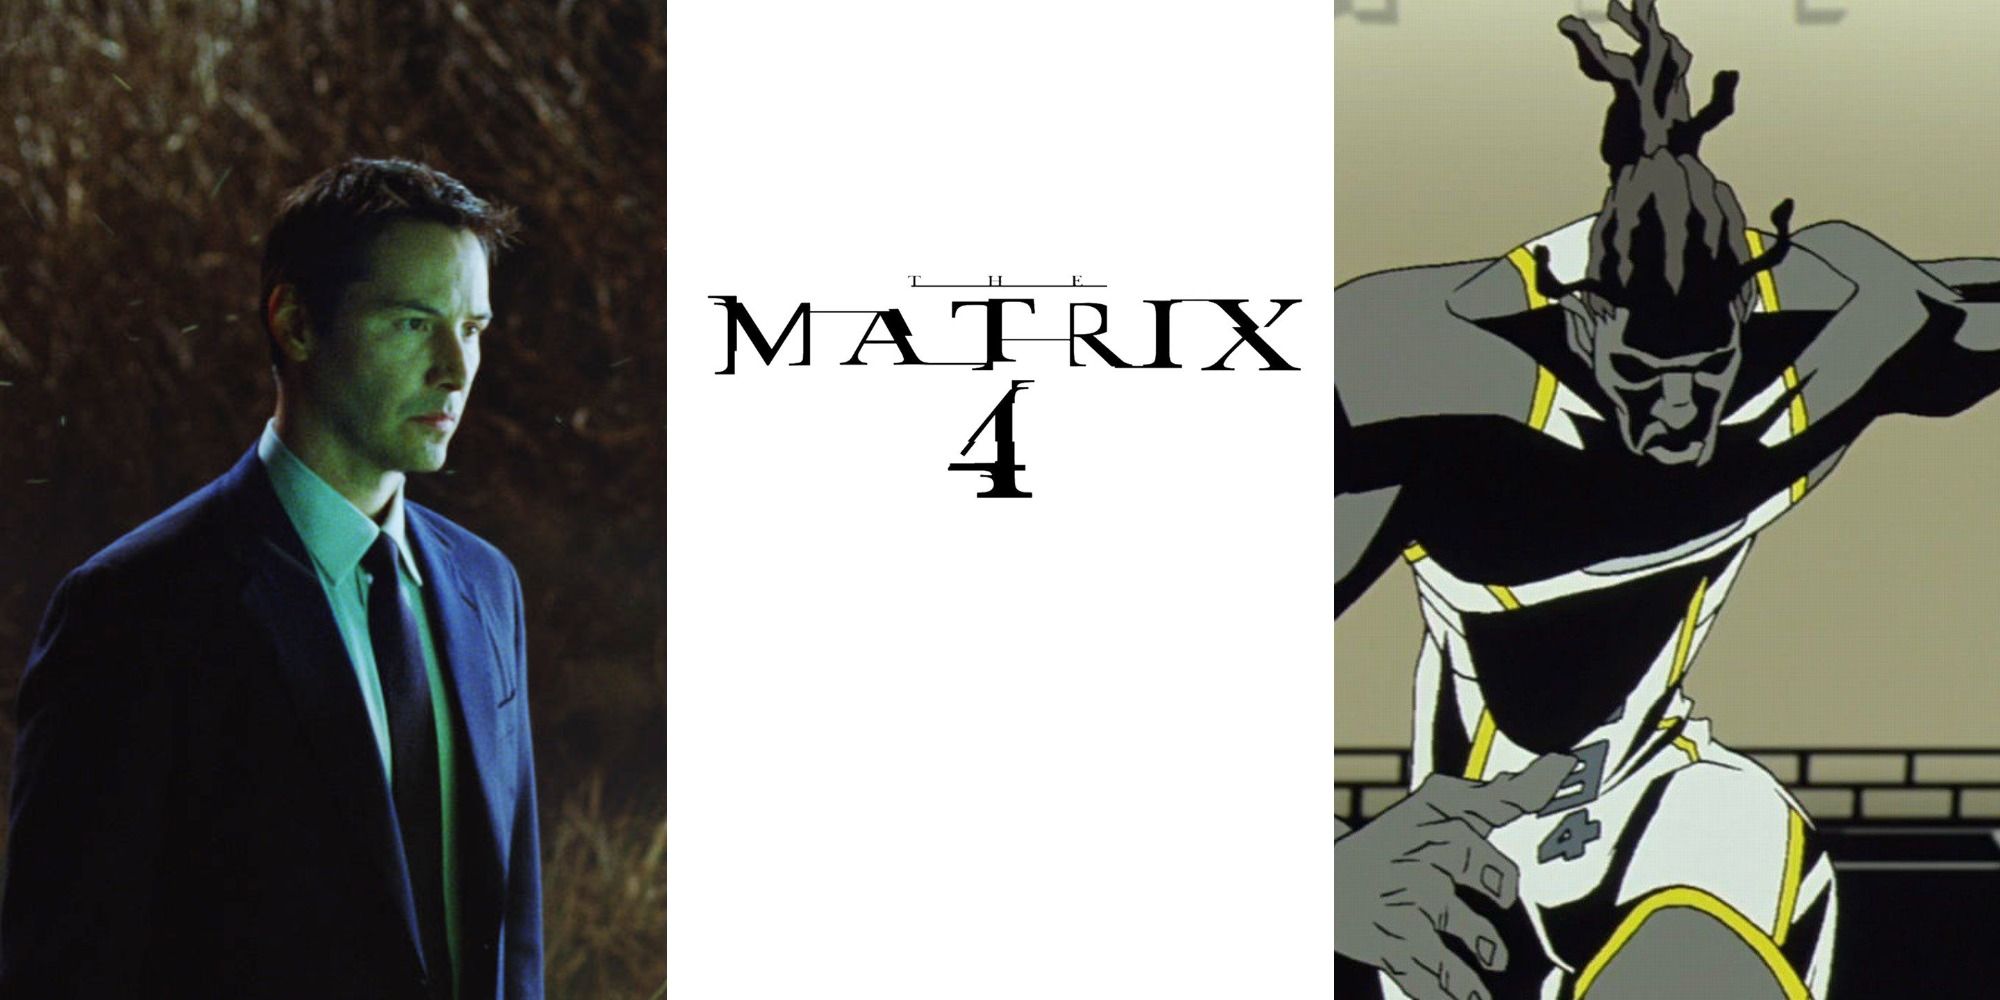 A collage of Keanu Reeves as Klaatu in a field in The Day the Earth Stood Still, the poster for The Matrix 4, and The Runner from The Animatrix